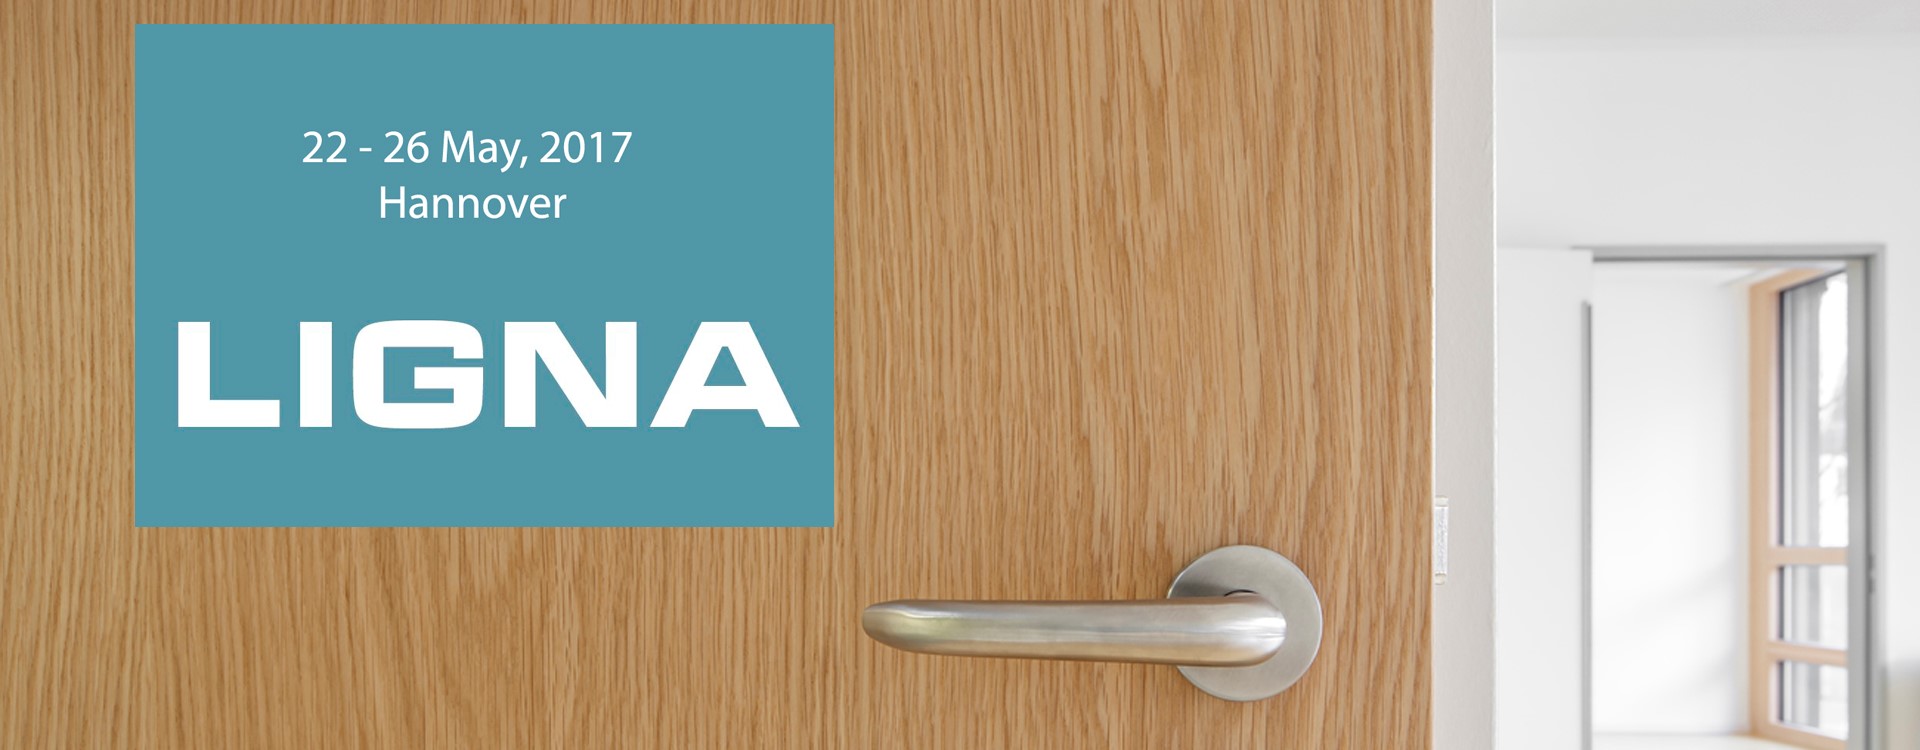 2017 LIGNA — Woodworking innovations